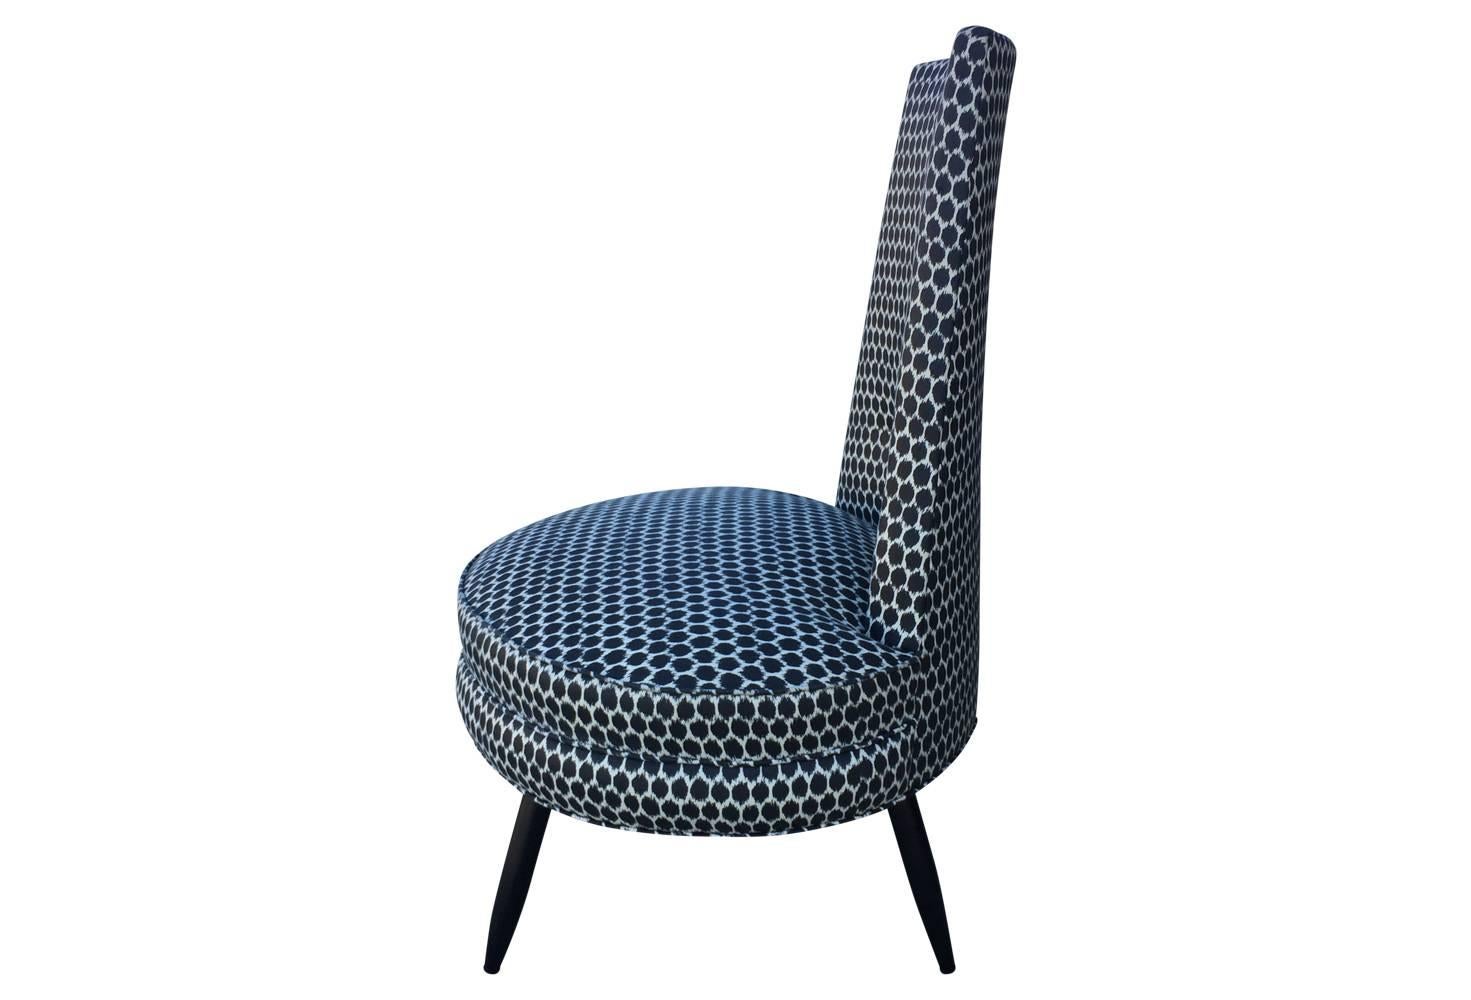 Lovingly restored, this high back chair boasts a unique form and ikat inspired grey and white polka dot fabric. Splayed spindle legs are ebonized.

Measures: 17 inch seat height
21 inch seat depth.